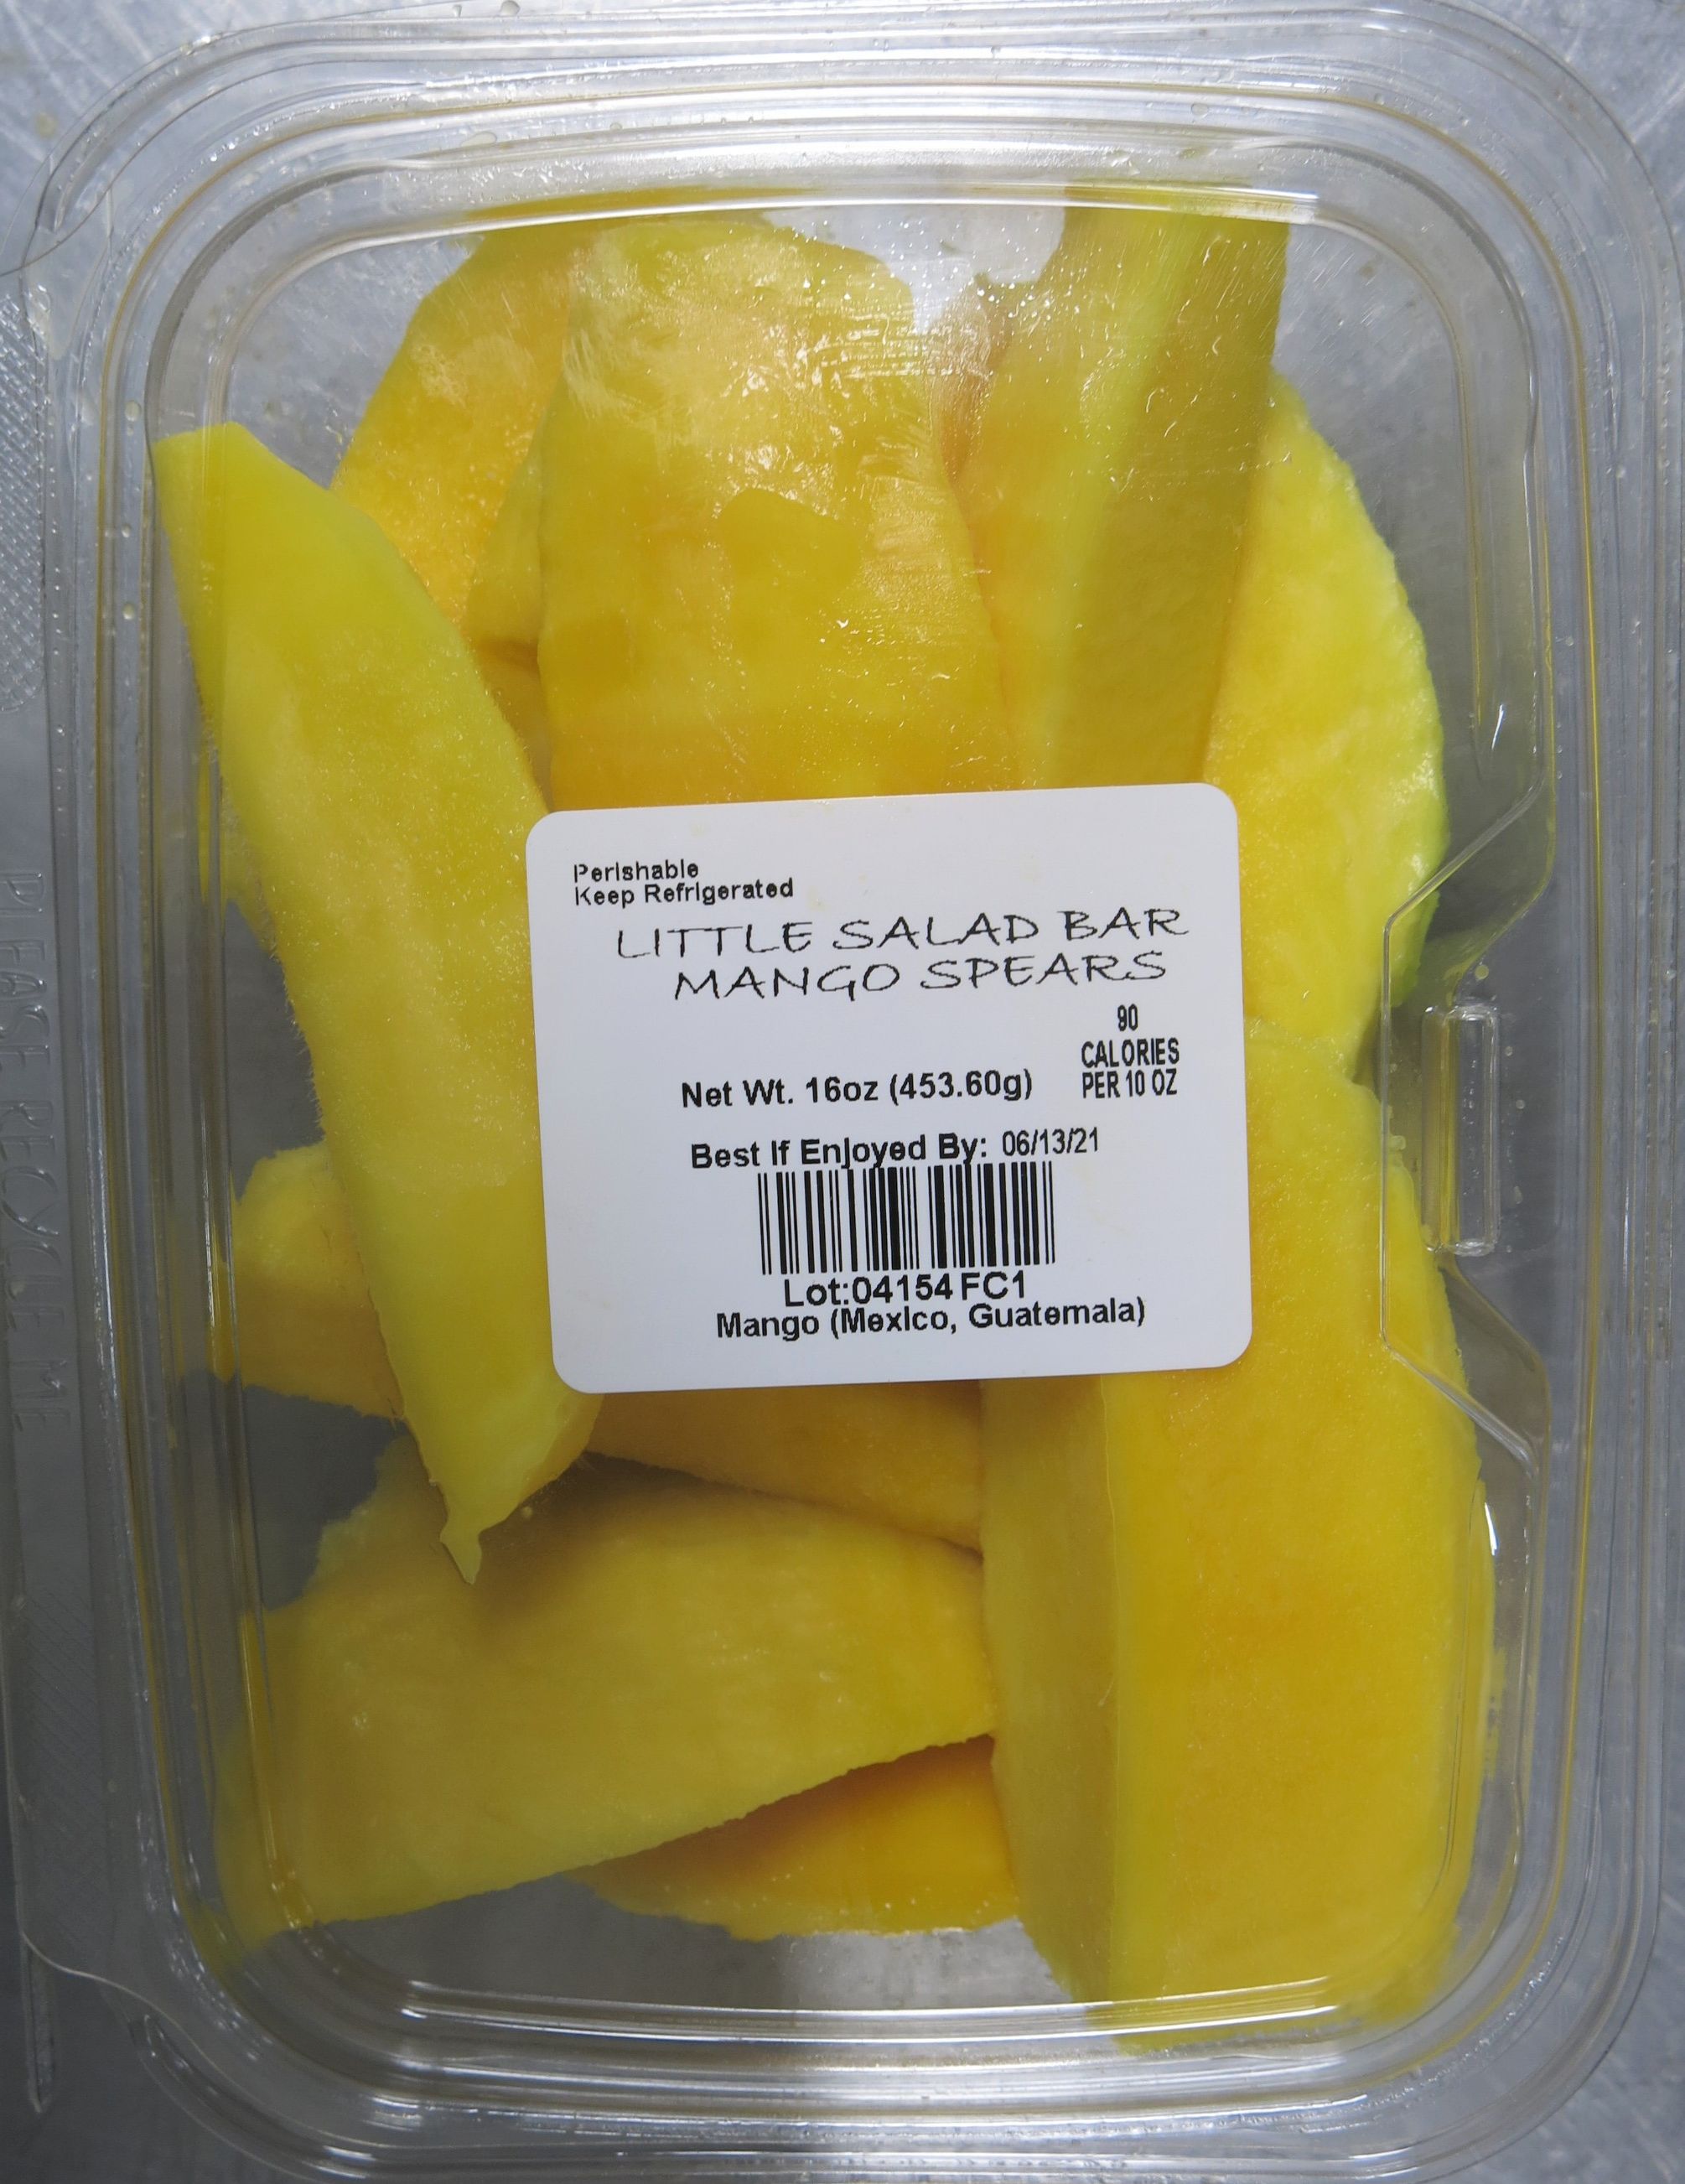 An example of a consumer package of fresh-cut mango with label information pursuant to the requirements of 21 CFR 101. 